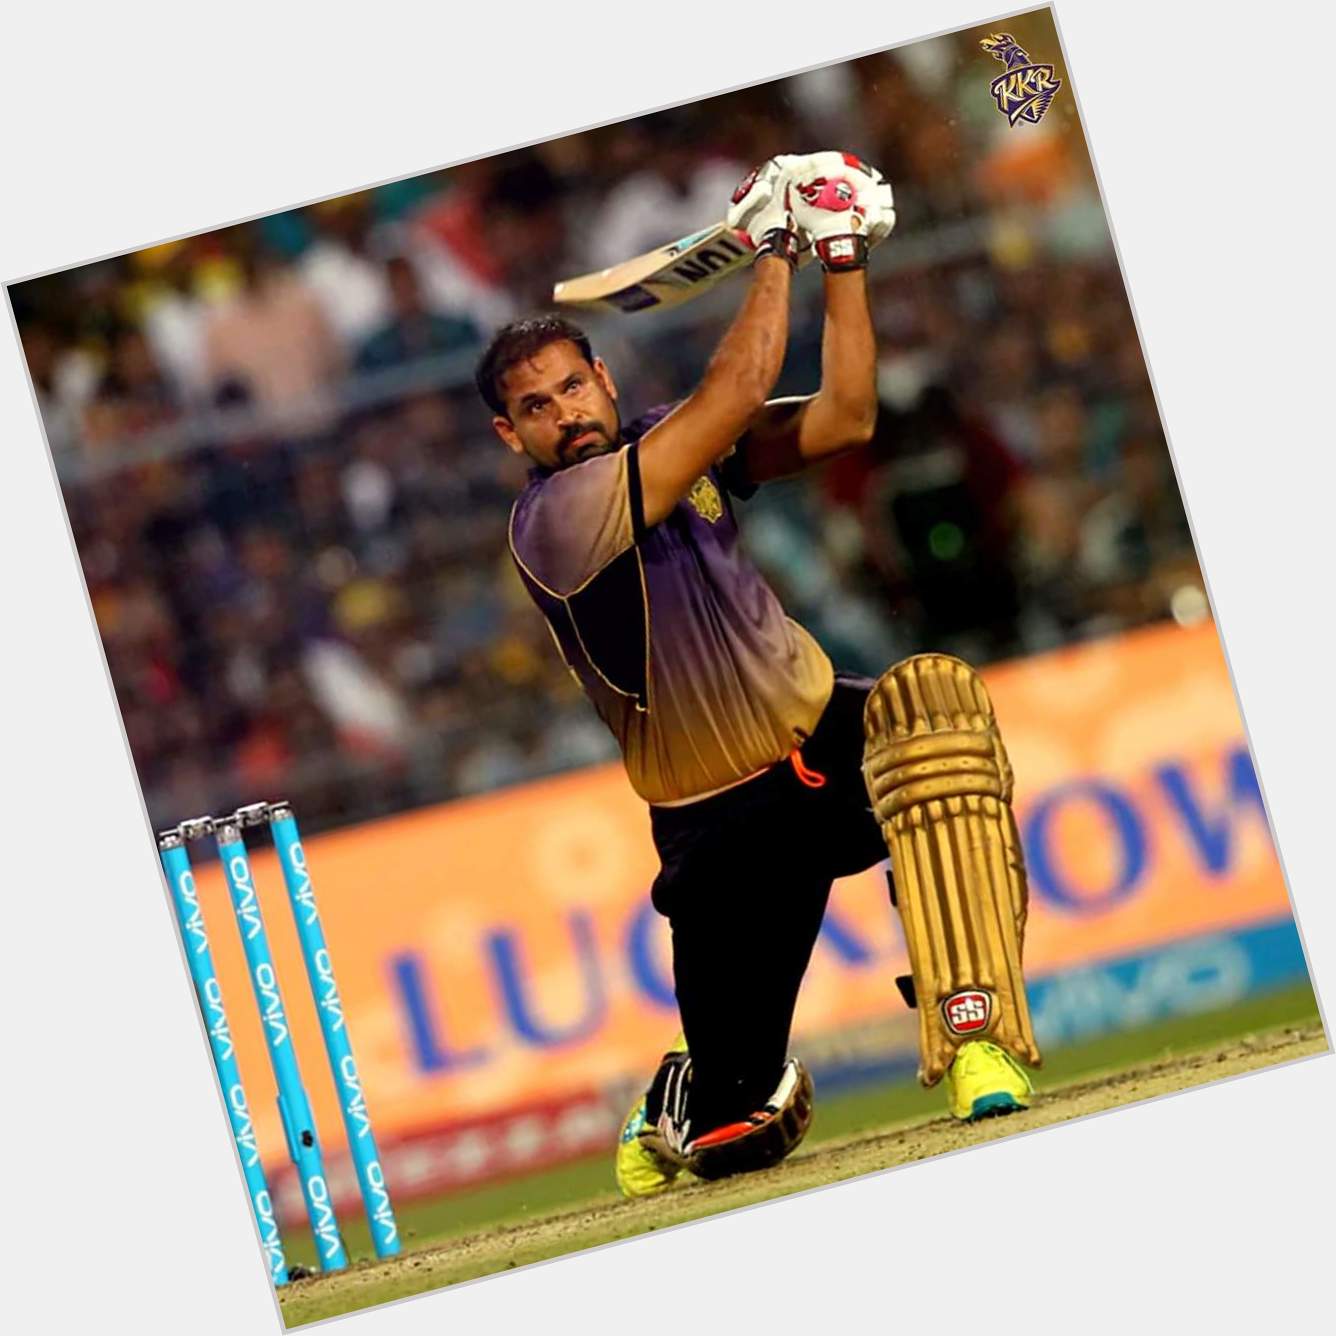 A man who lit up the Eden Gardens with his explosive batting Happy Birthday to our former Knight Yusuf Pathan 